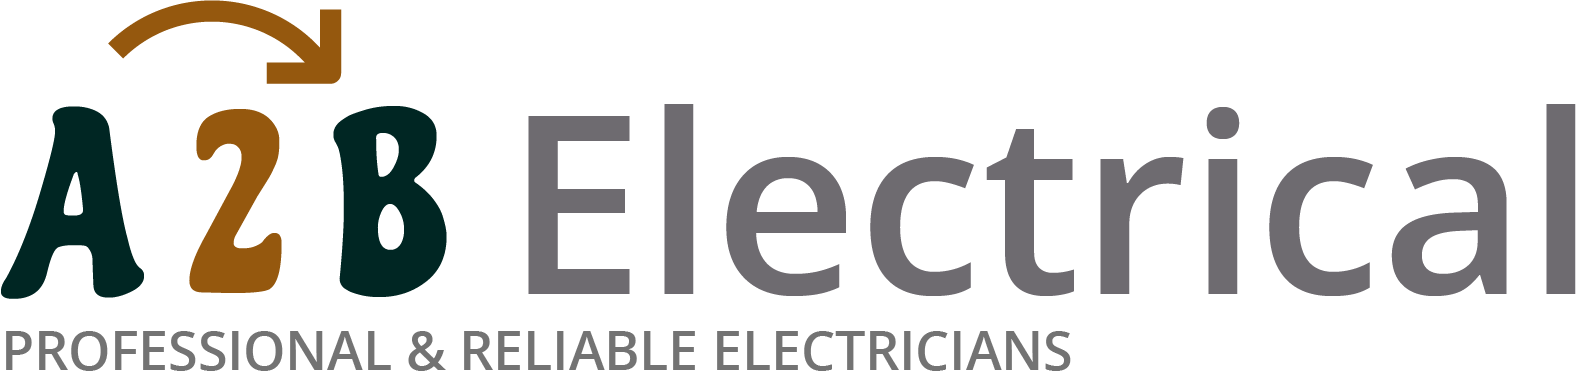 If you have electrical wiring problems in Chesham, we can provide an electrician to have a look for you. 